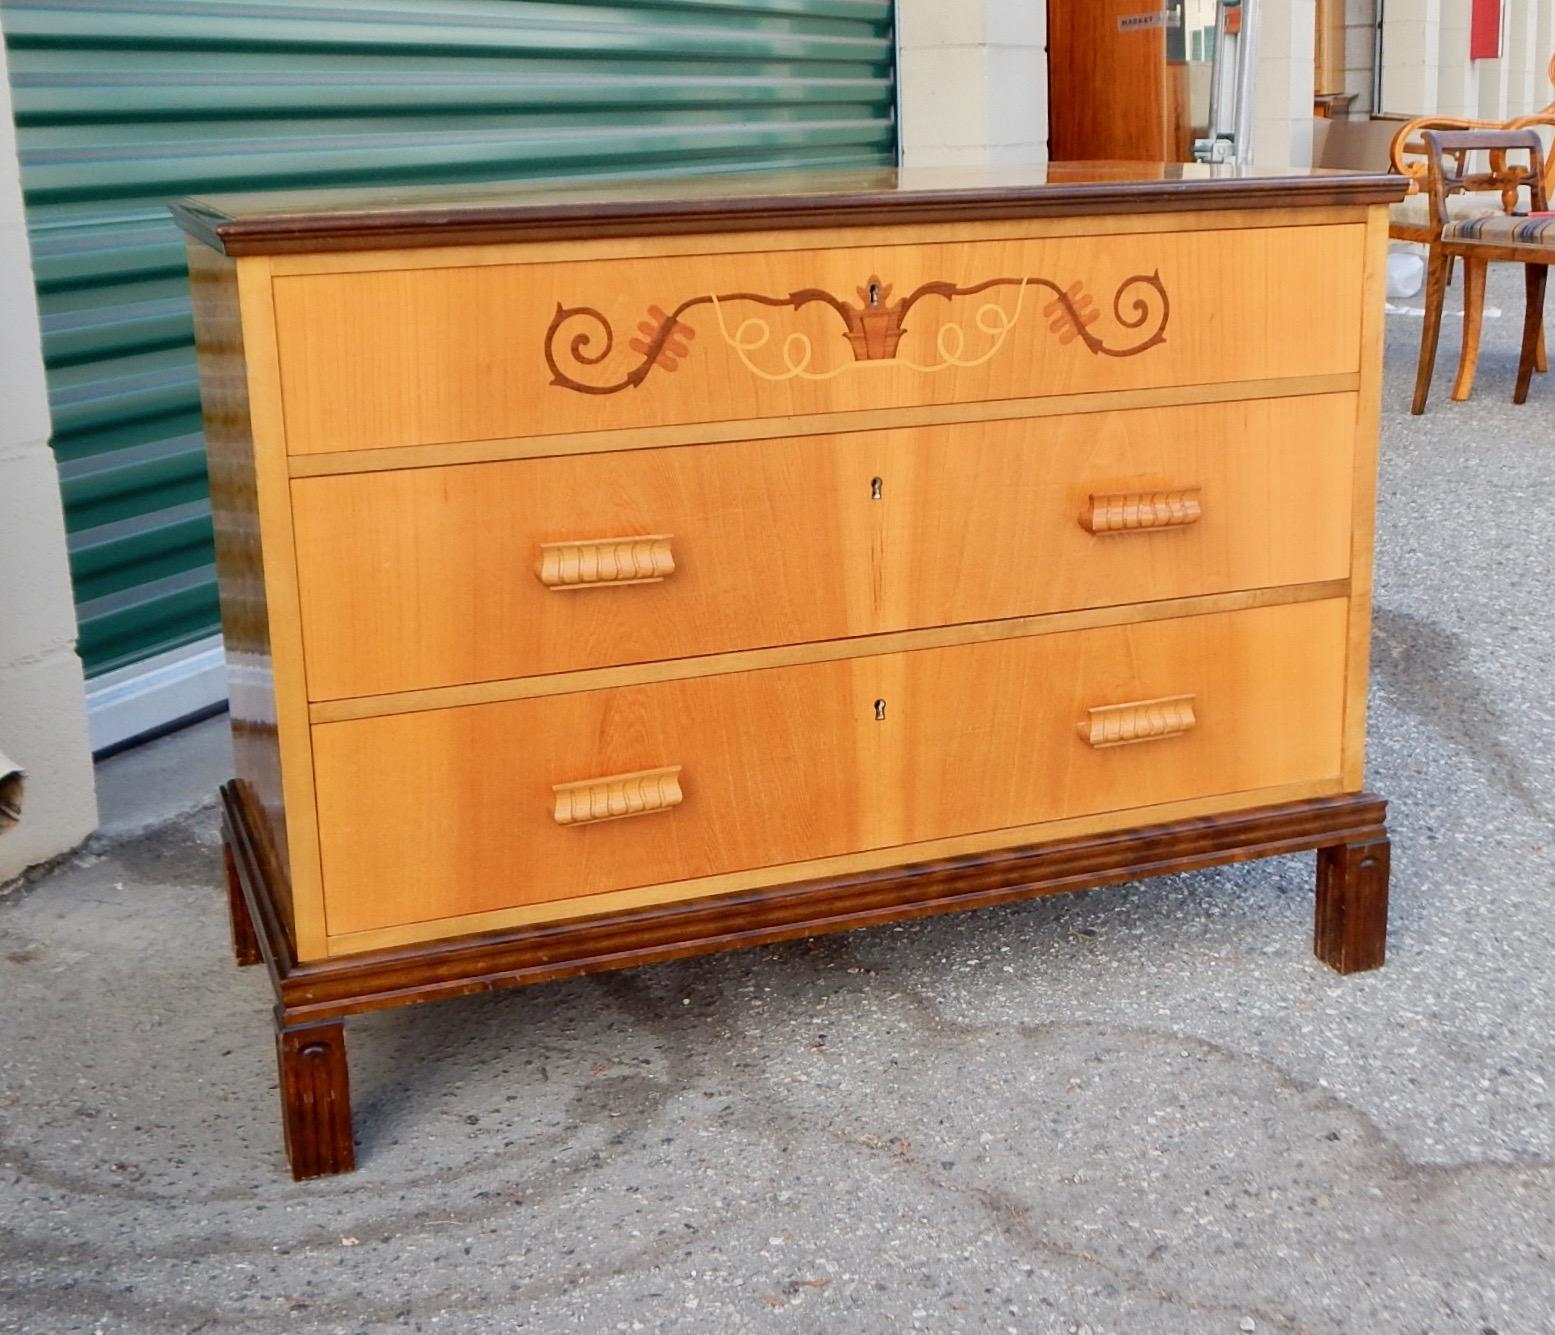 Swedish Art Deco inlaid chest of drawers rendered in elm with rosewood inlay. Top in highly figured golden flame birch wood. Three drawers. In great original condition with some age appropriate signs of wear. Ready to give a life time of good use.